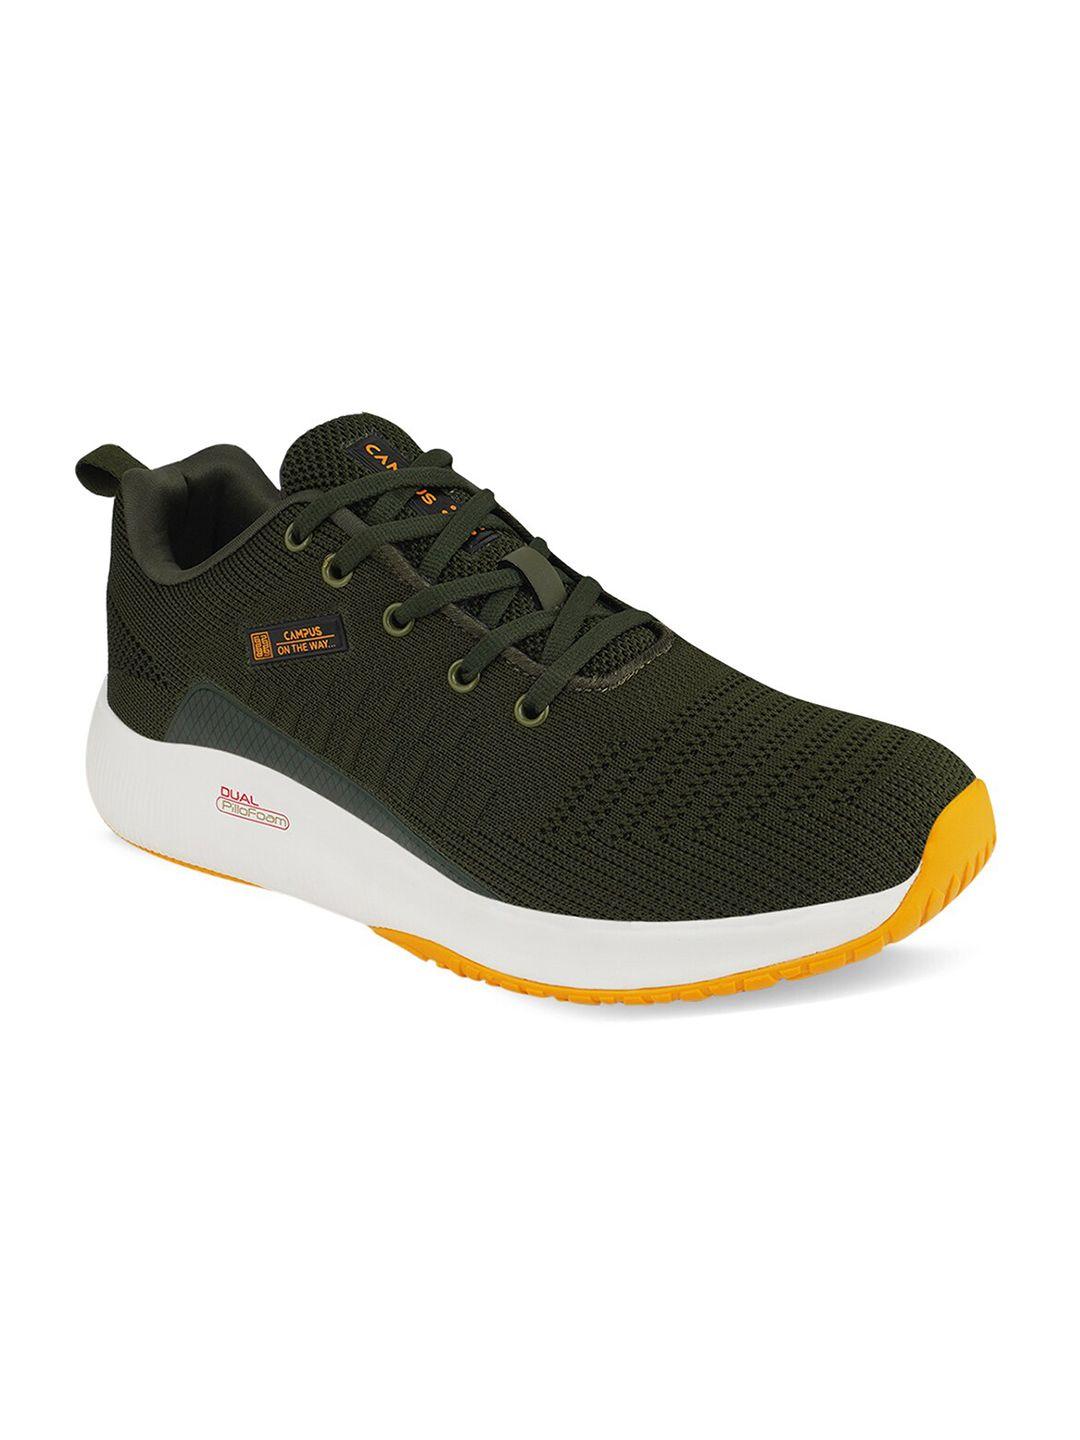 campus-men-olive-green-mesh-running-shoes